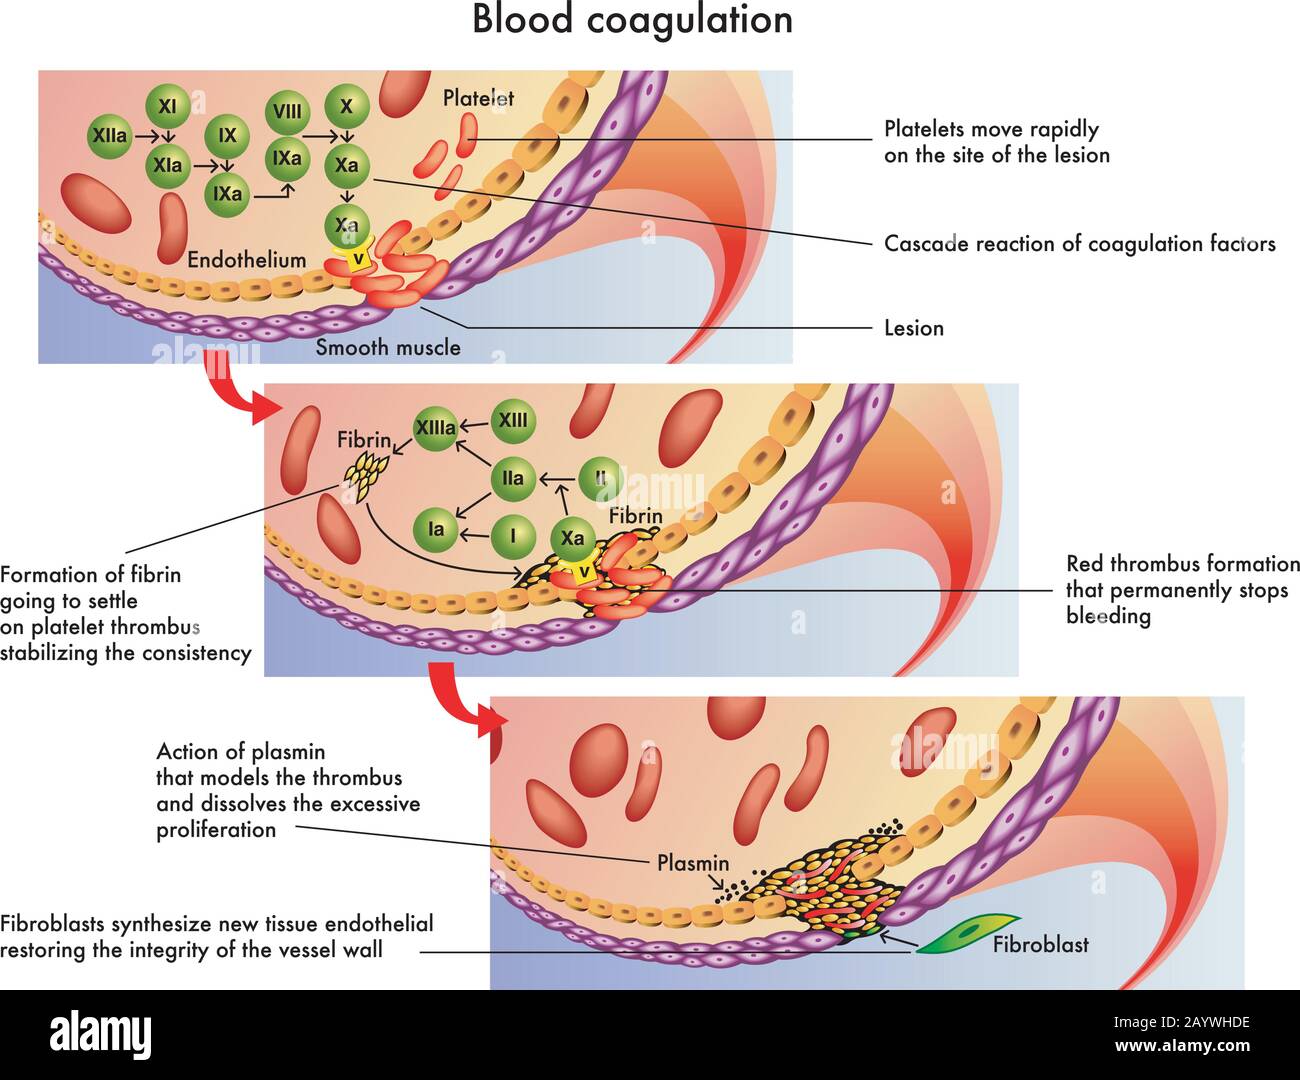 Medical illustration of the process of blood coagulation. Stock Vector